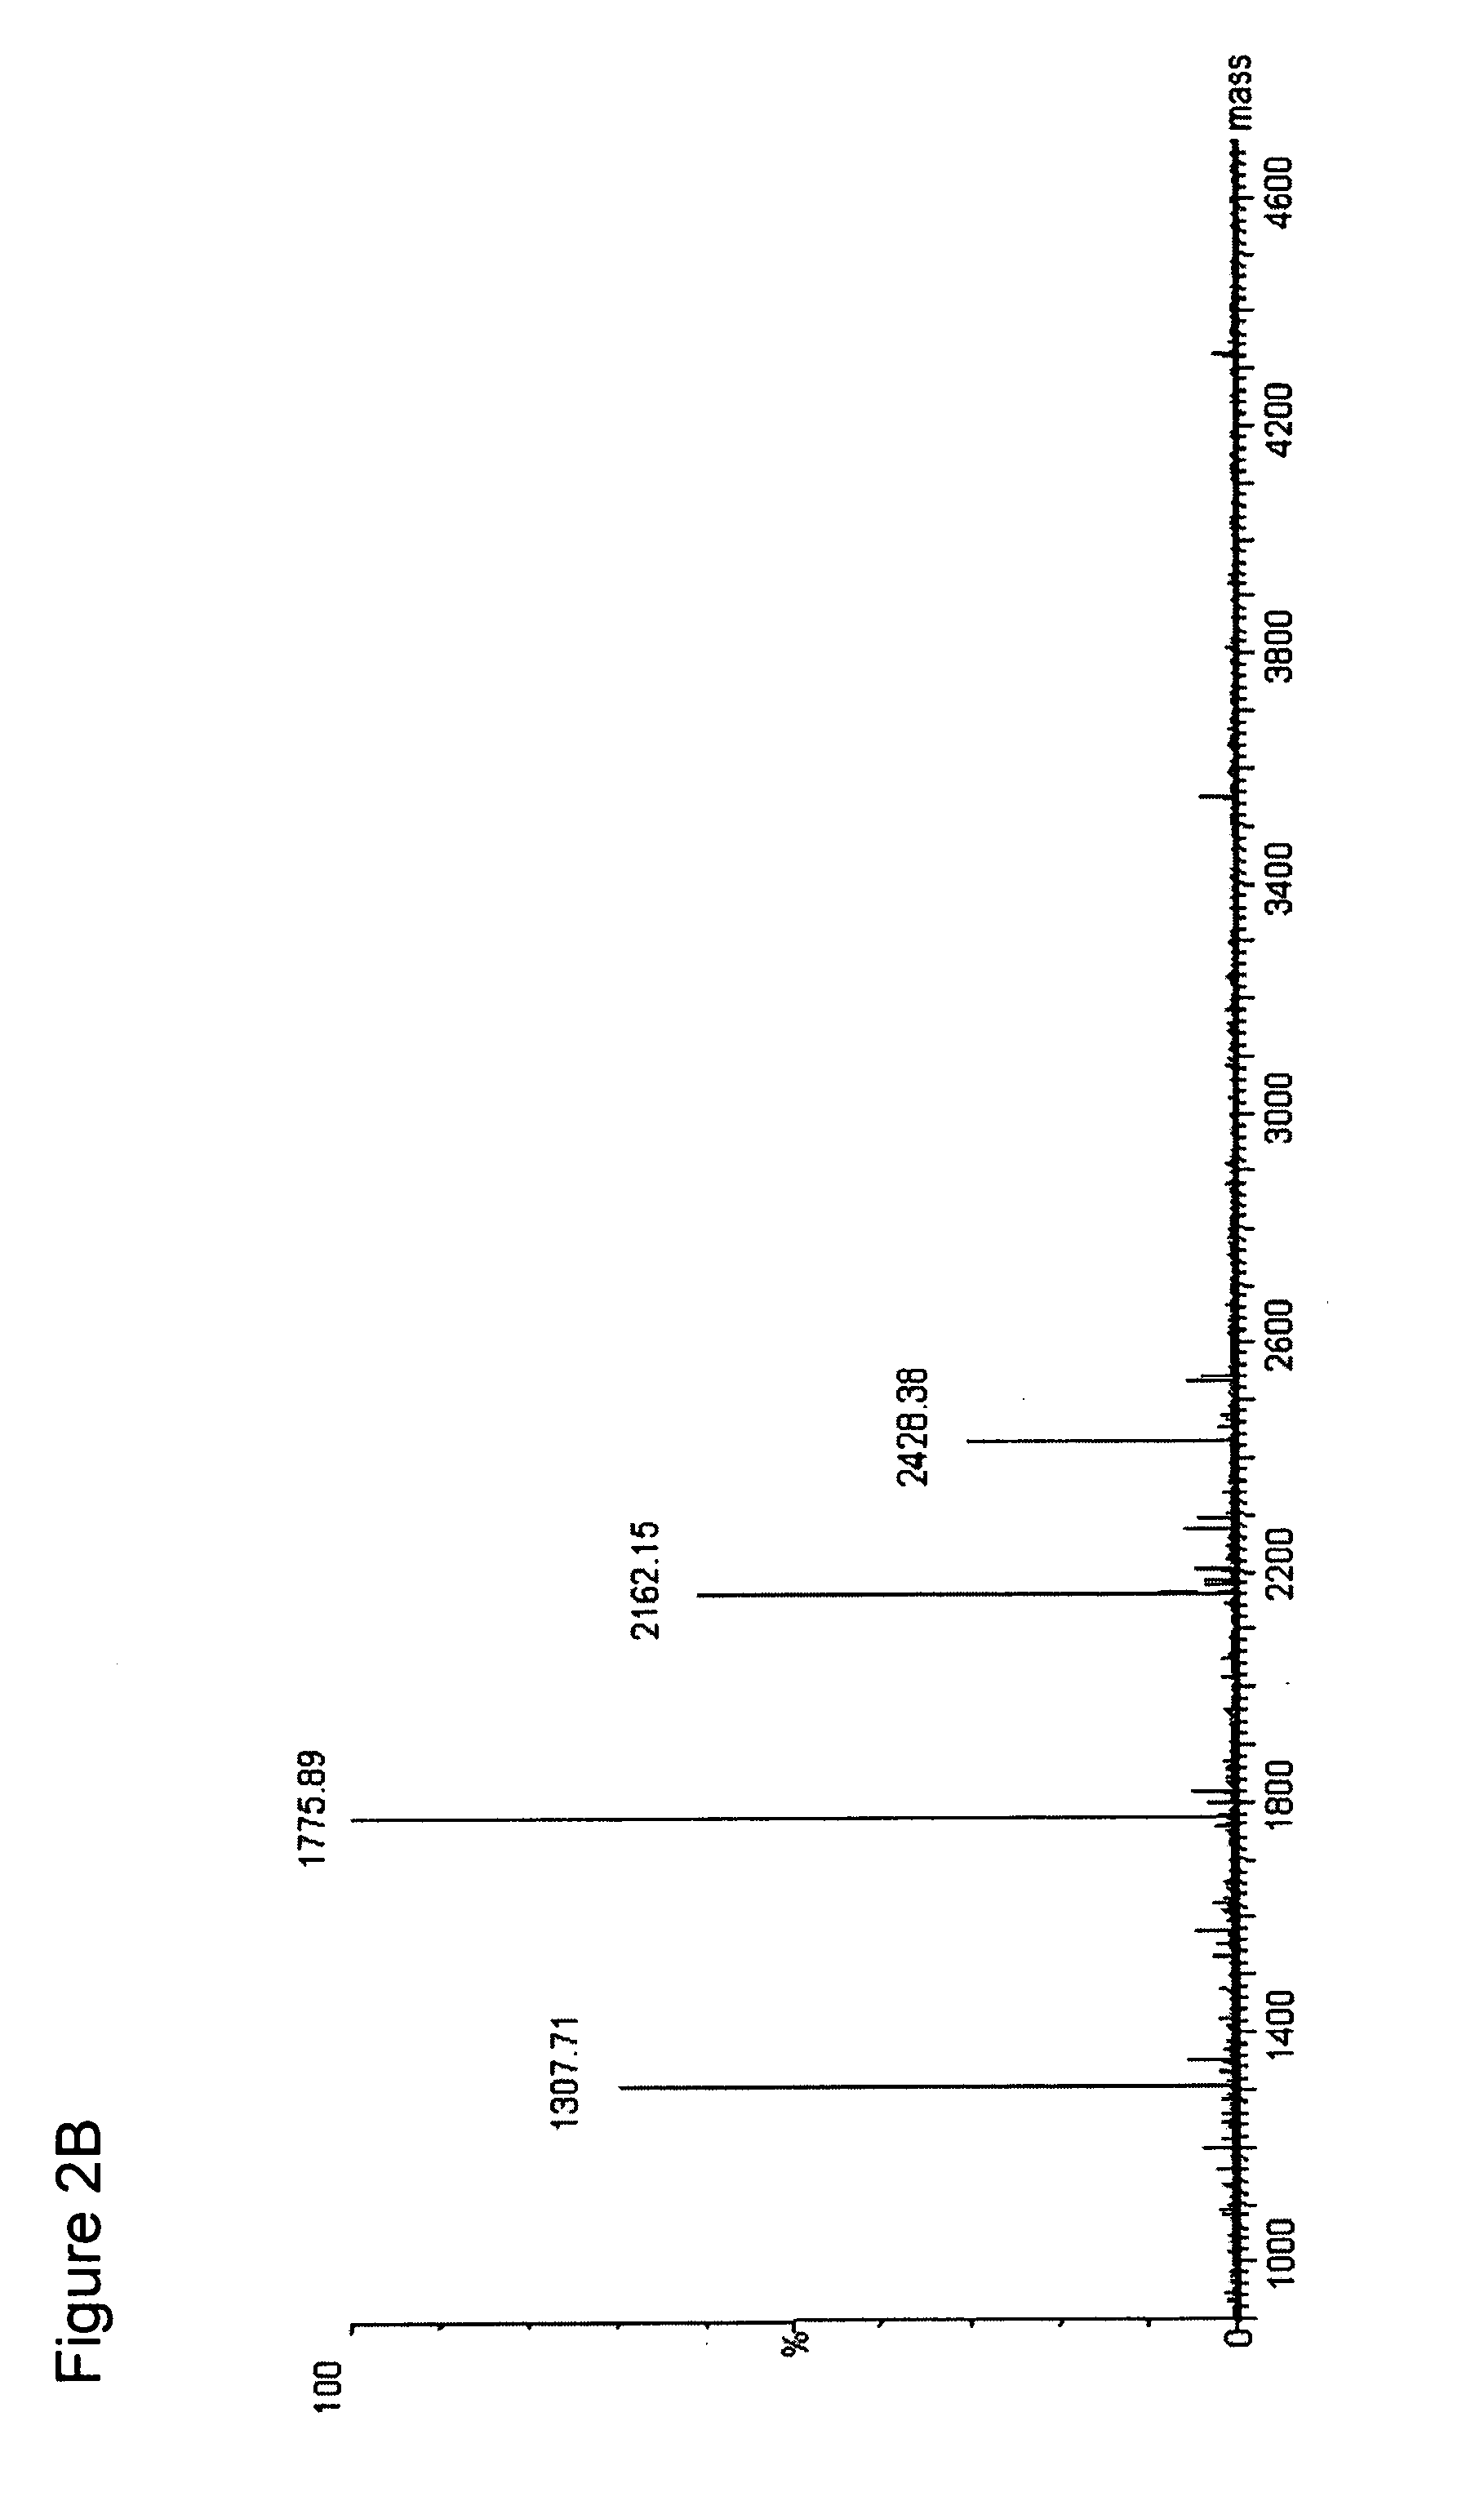 Method of selective peptide isolation for the identification and quantitative analysis of proteins in complex mixtures